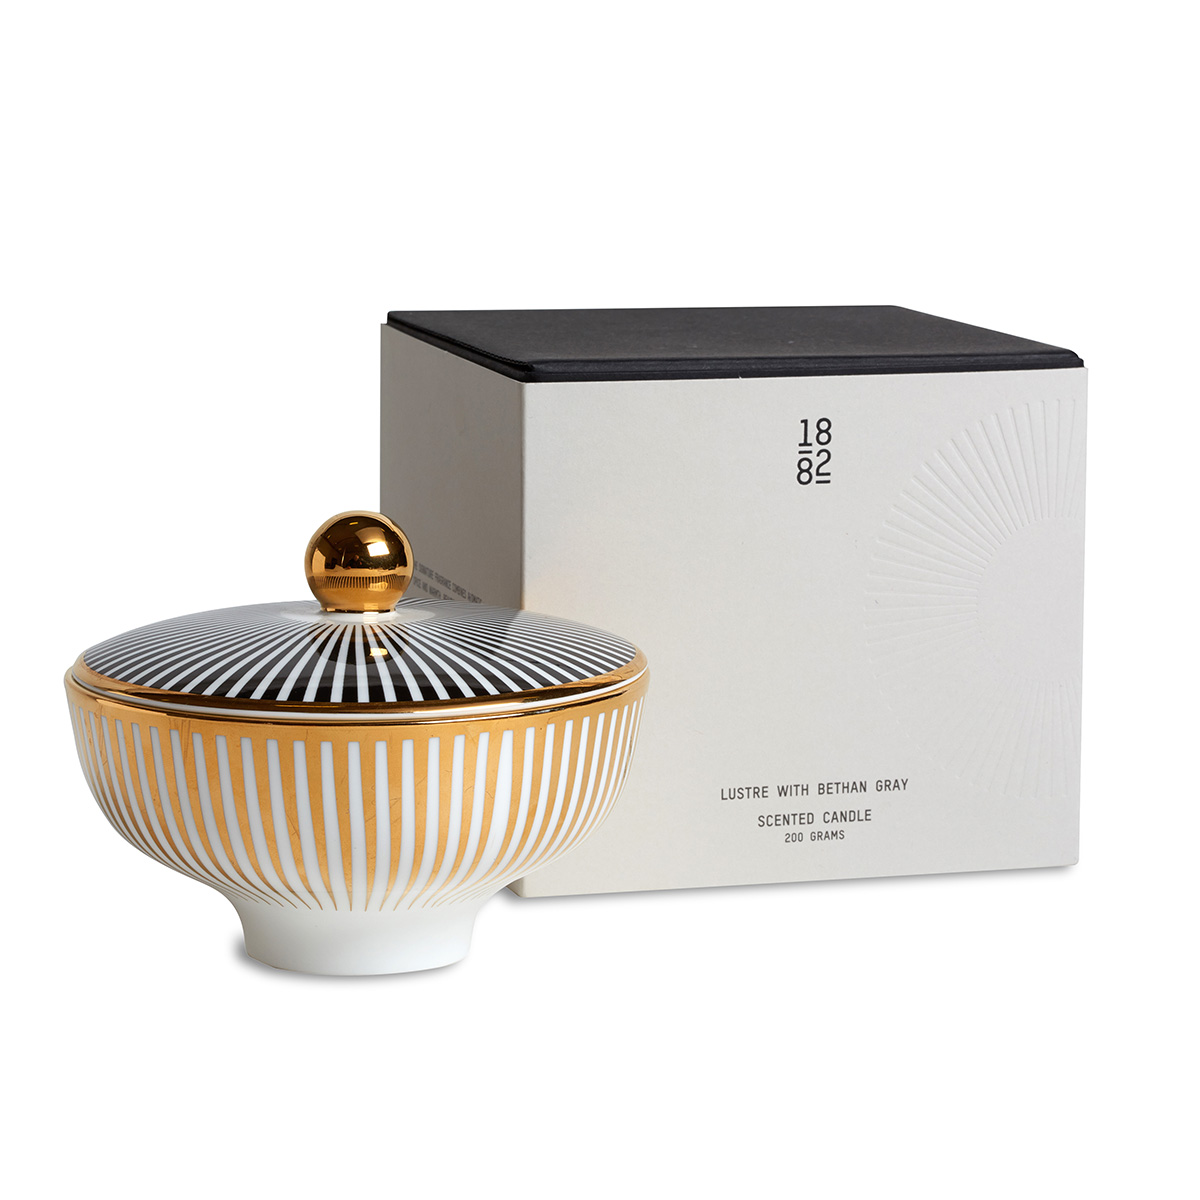 Lustre Candle by 1882 Ltd and Bethan Gray